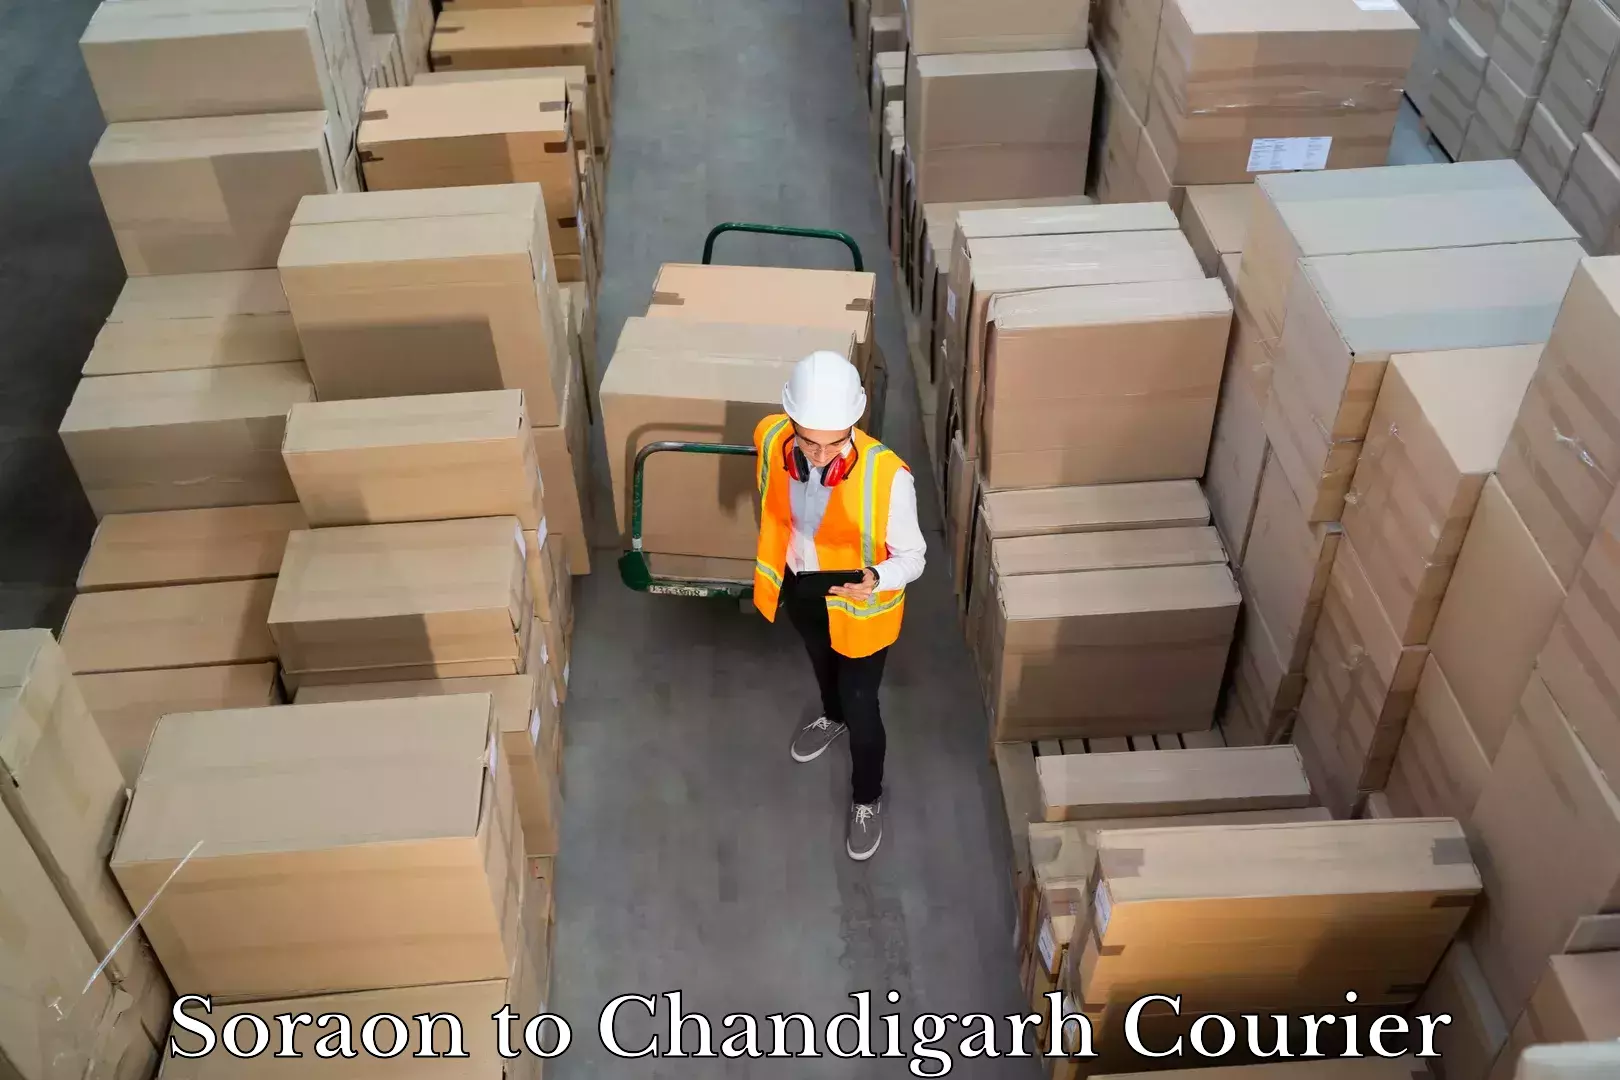 Online luggage shipping booking Soraon to Chandigarh